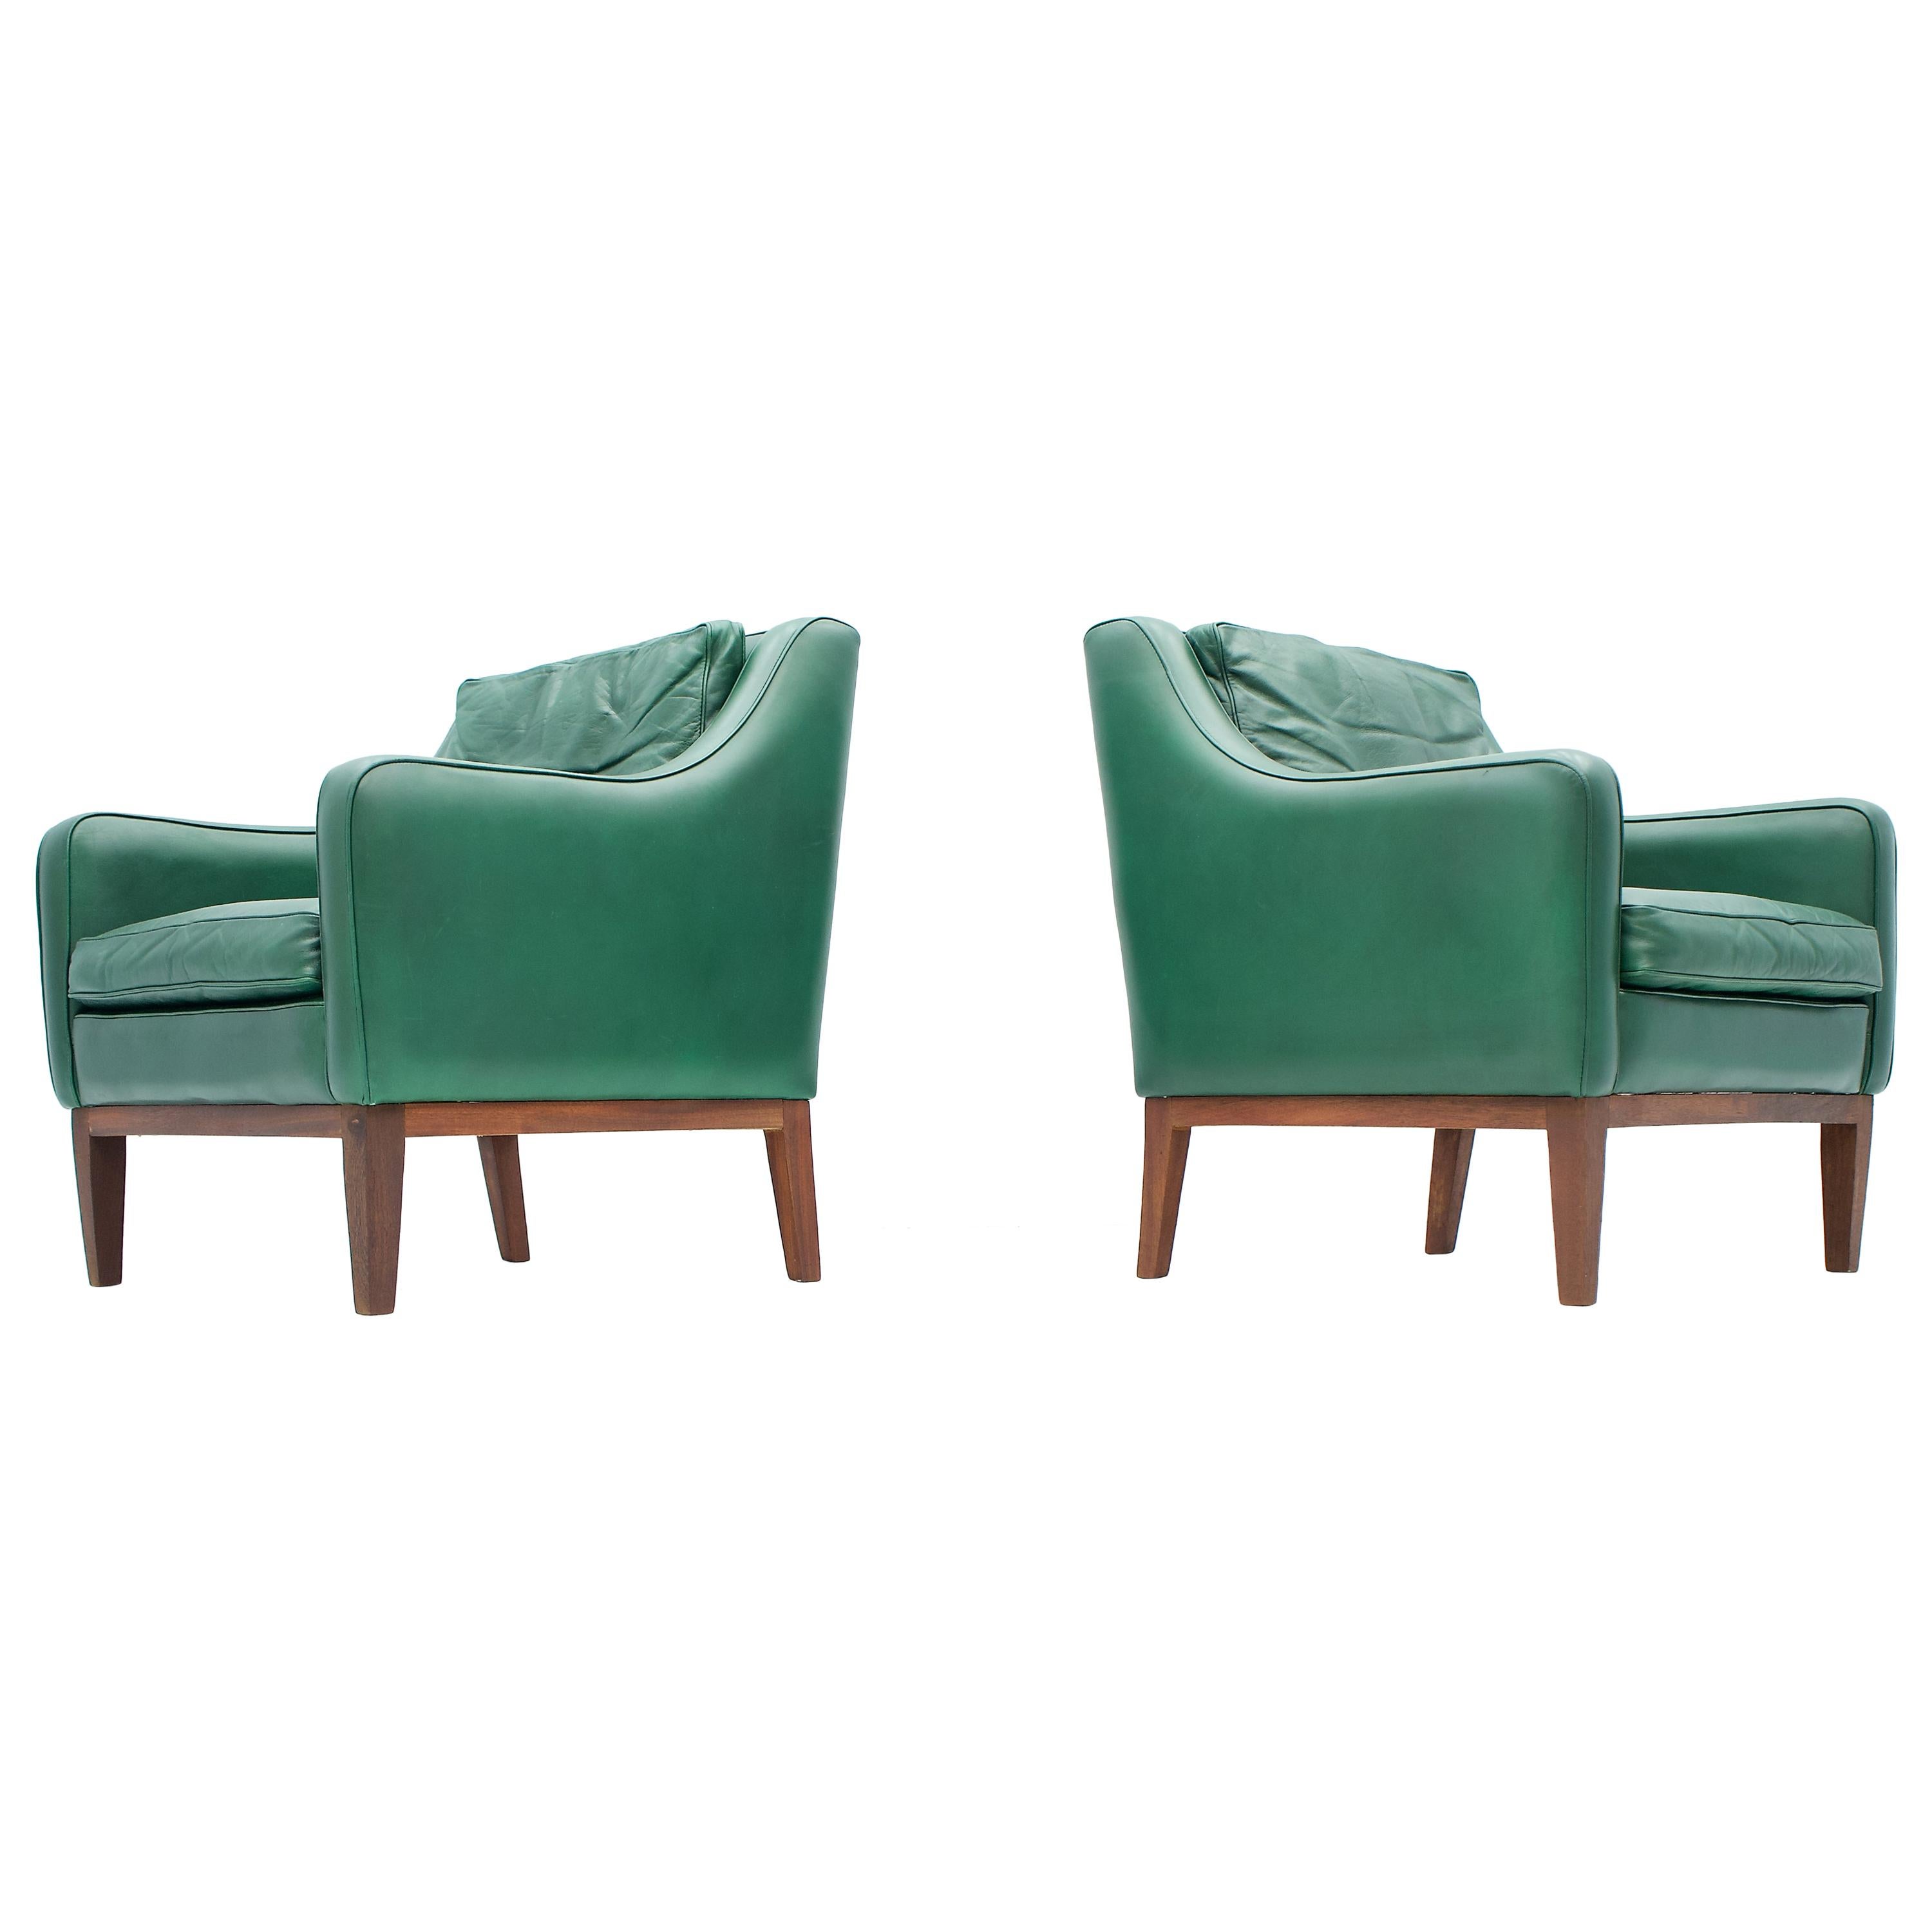 Pair of Italian Lounge Chairs in Green Leather, 1958 For Sale